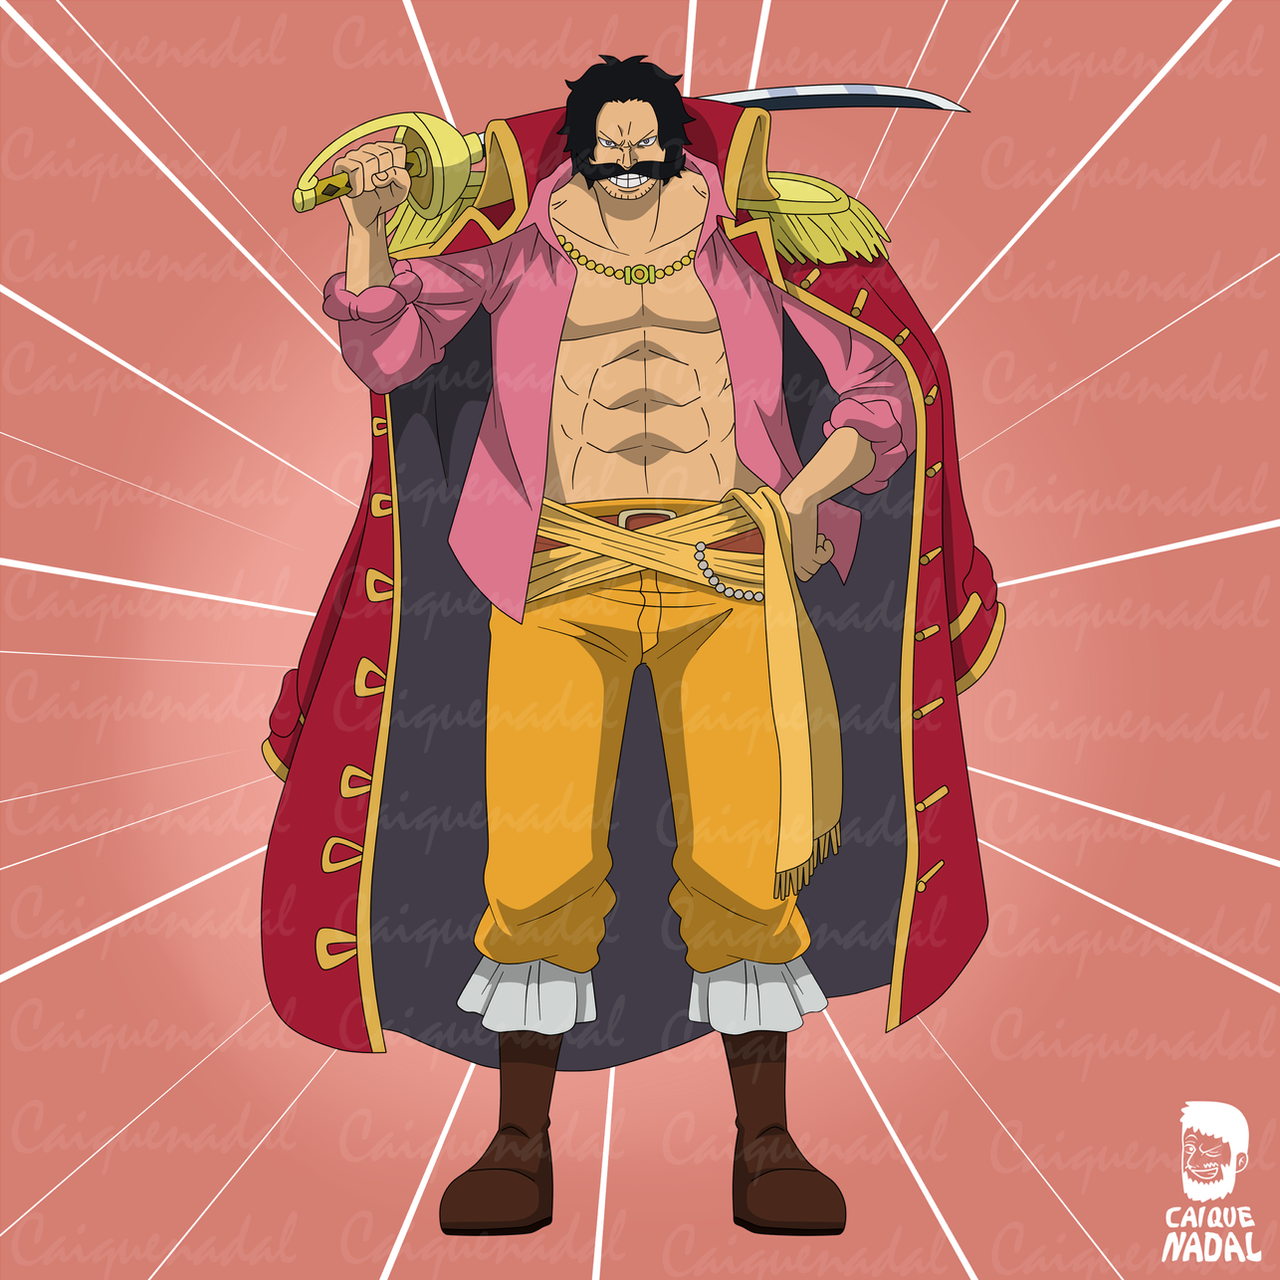 Gol D. Roger by me : r/OnePiece